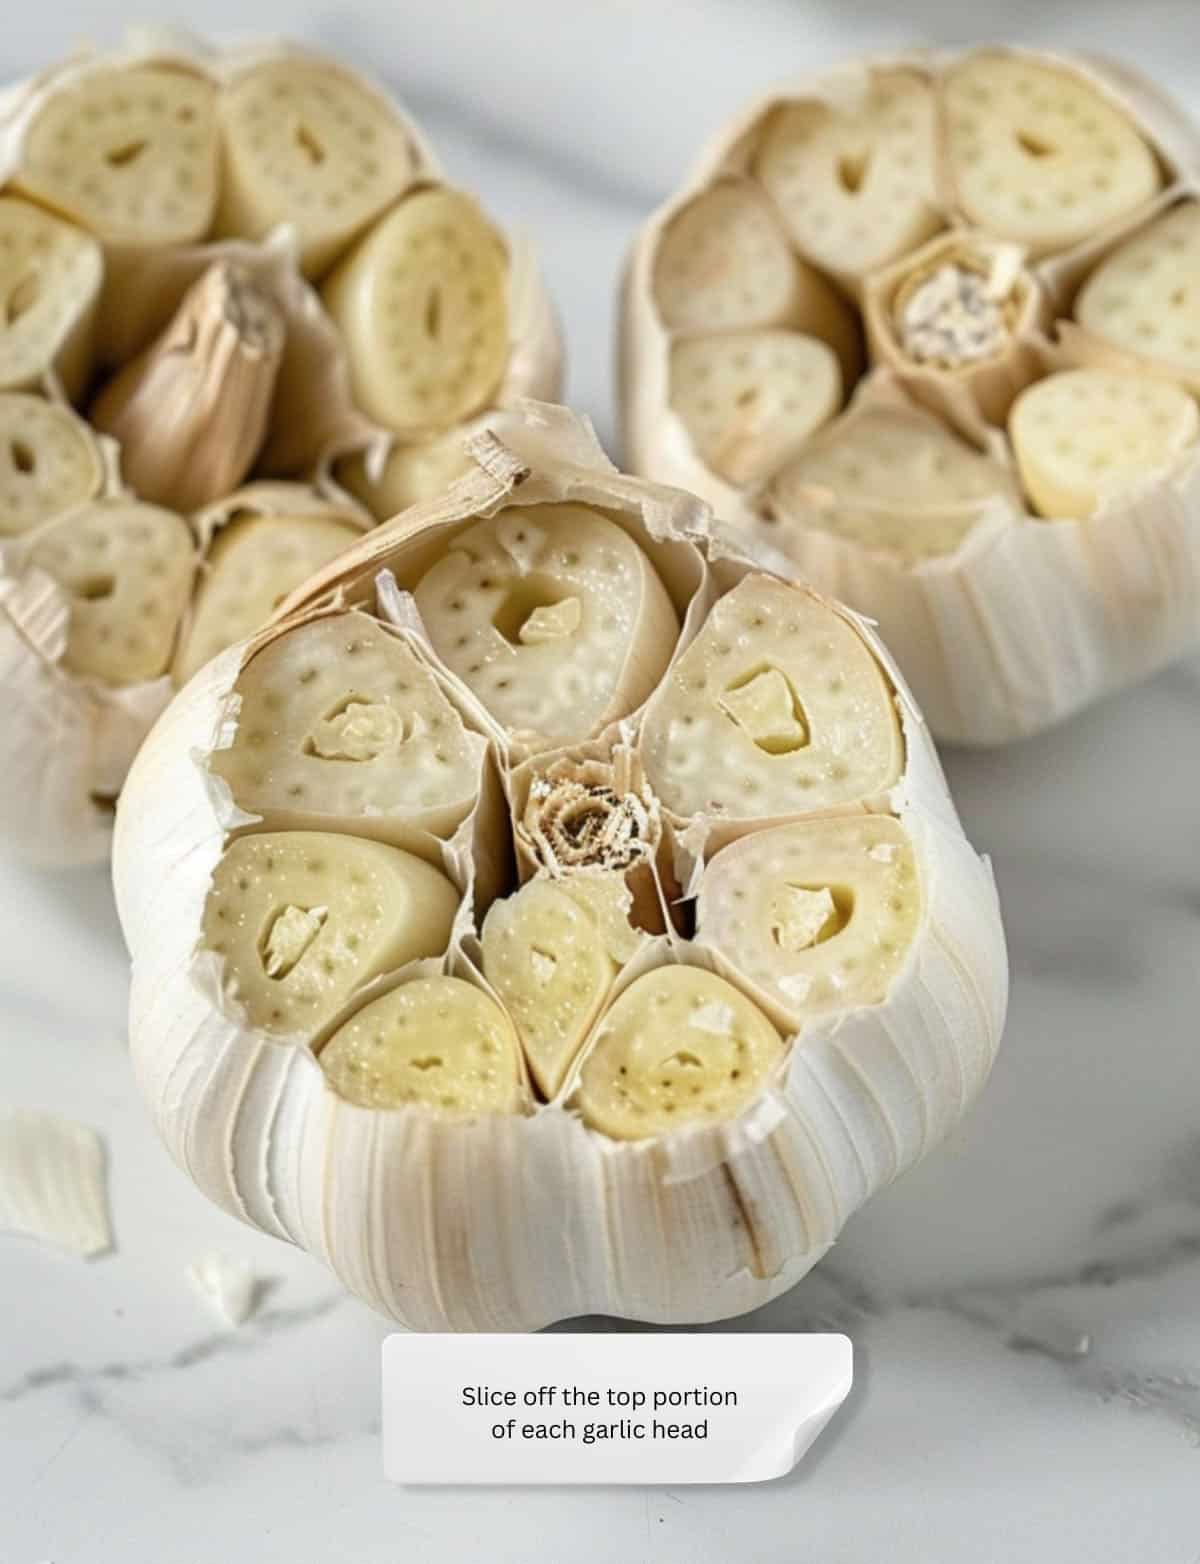 Sliced garlic heads with exposed cloves ready for roasting.